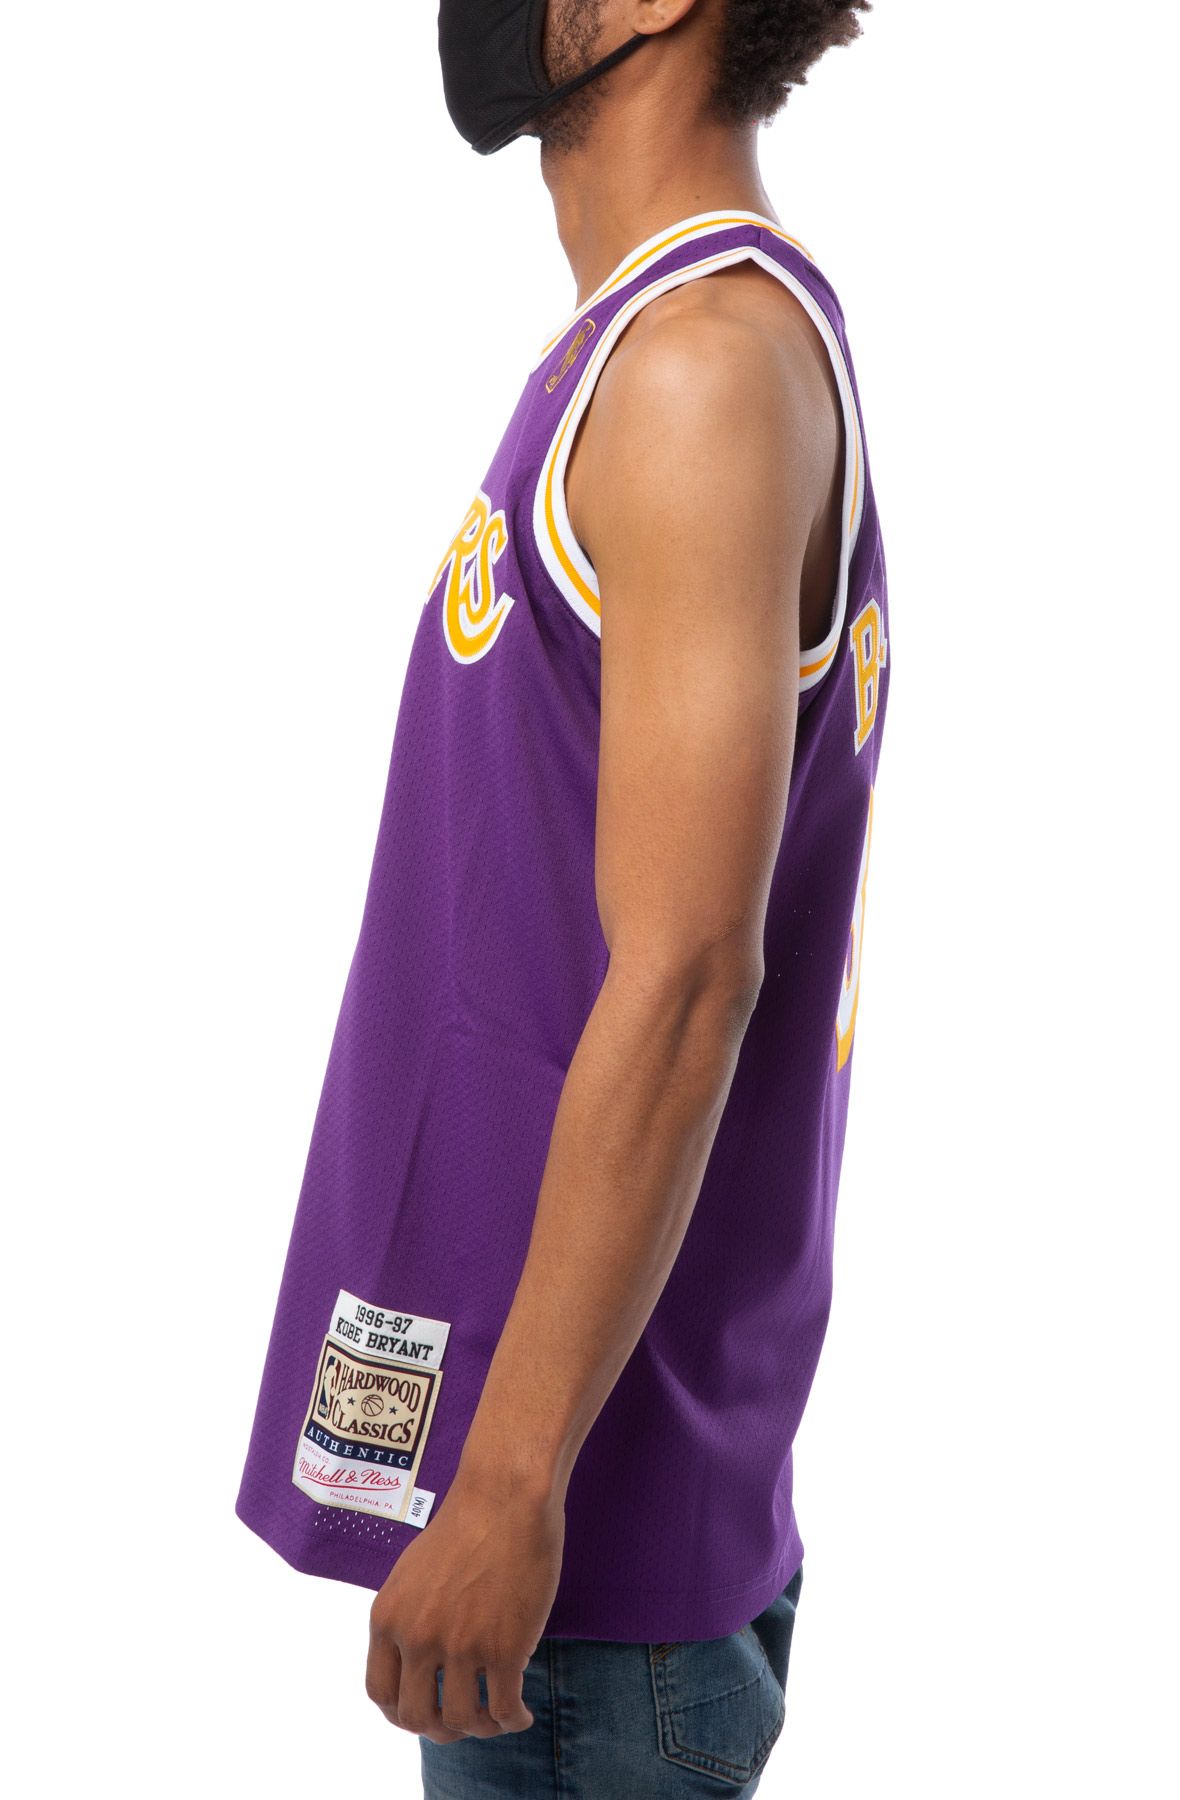 LOS ANGELES LAKERS KOBE BRYANT 1996-97 AUTHENTIC ROAD JERSEY